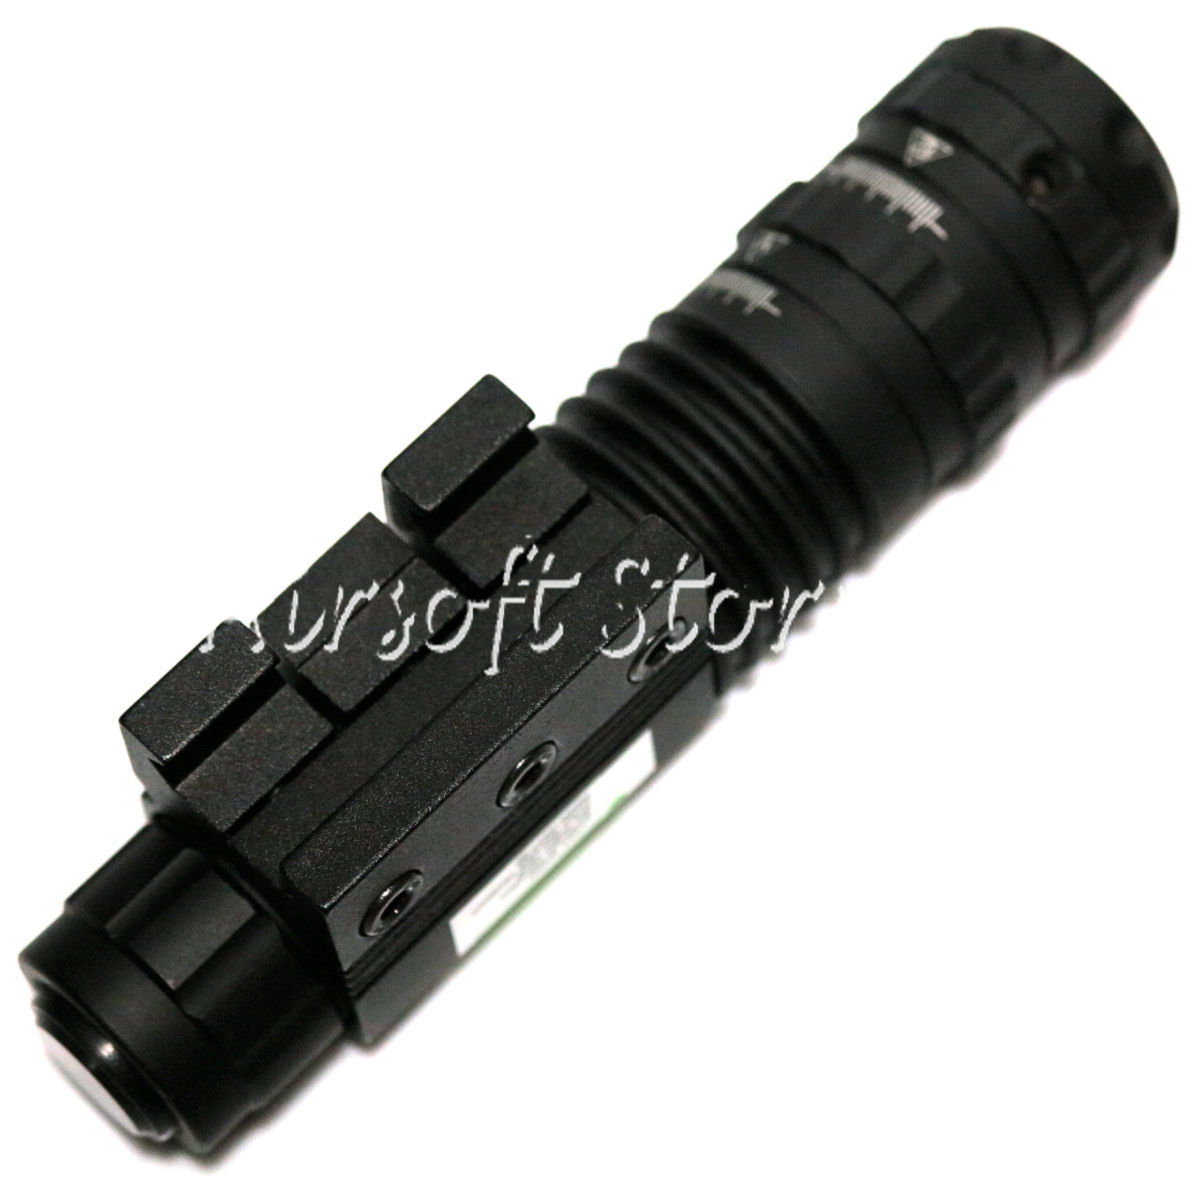 LXGD Tactical Gear High Power Visible Green Laser Sight Pointer JG-018 - Click Image to Close